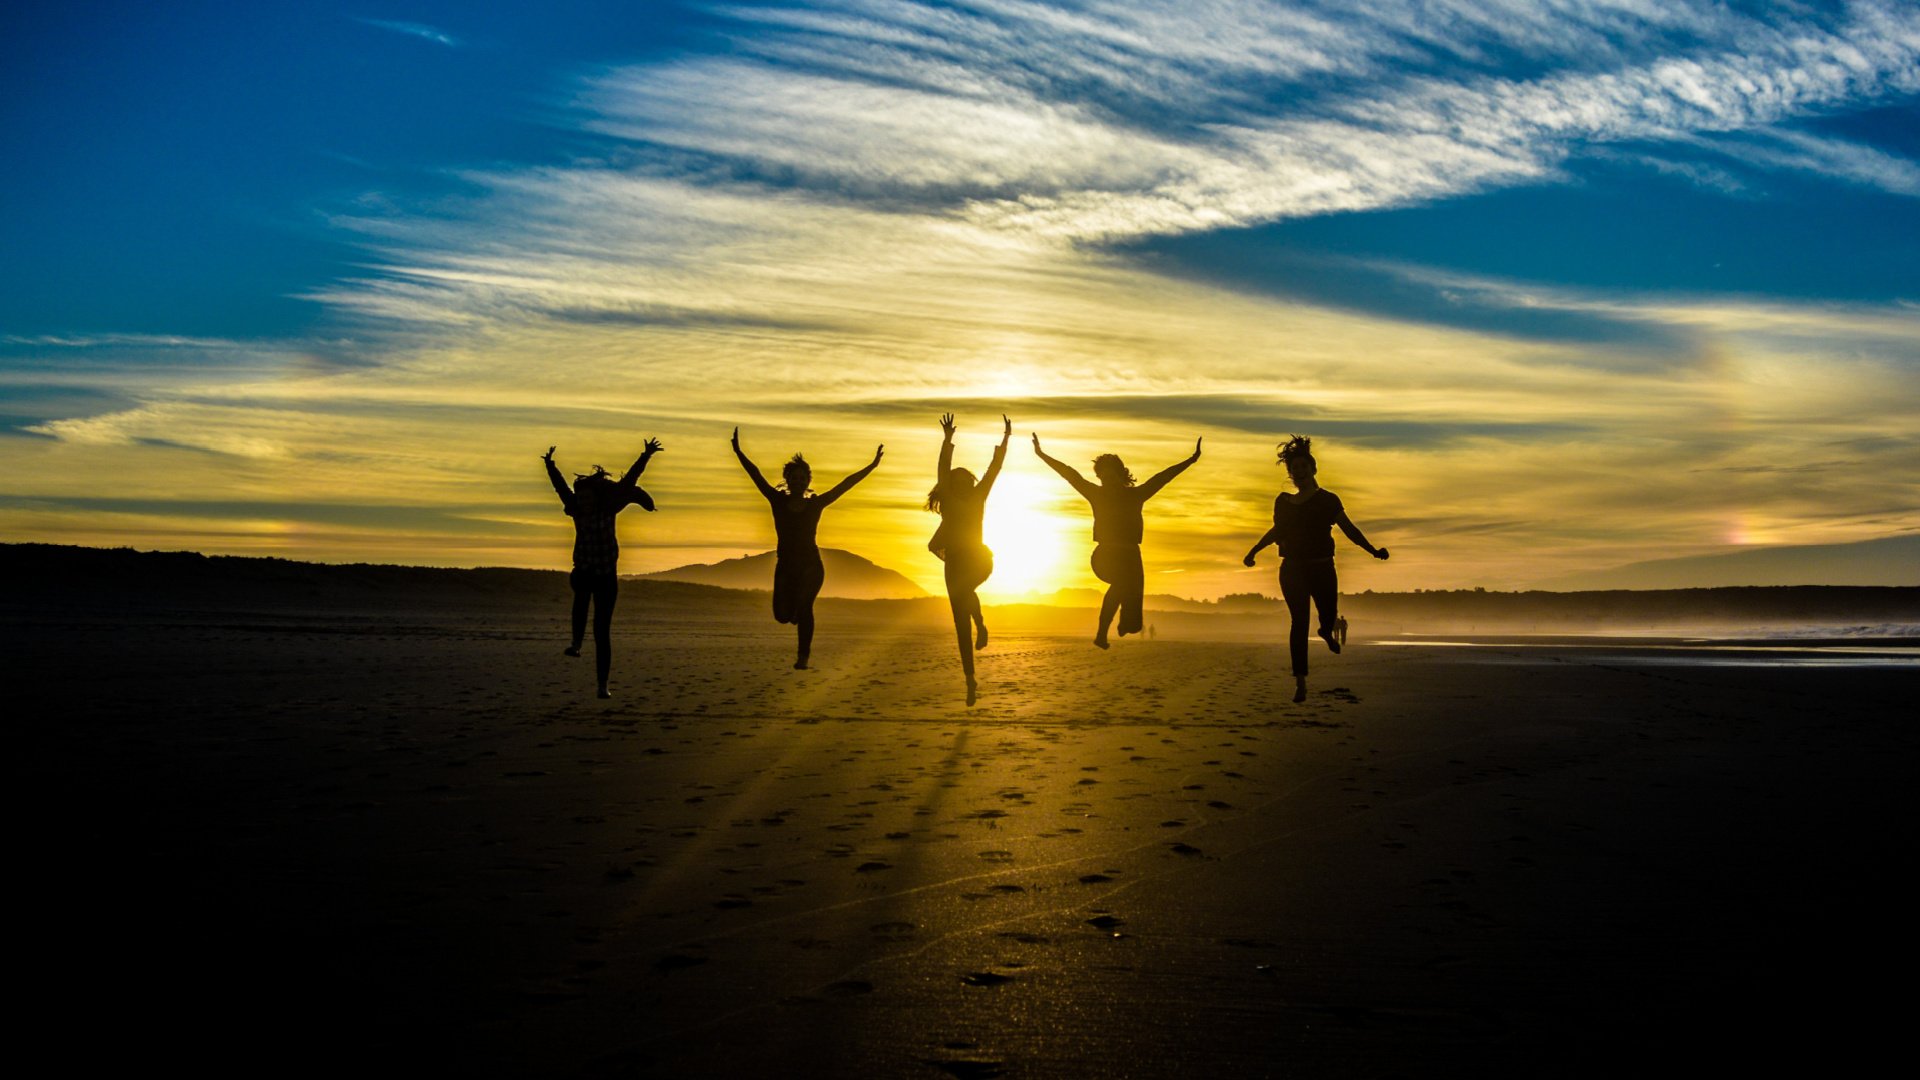 Five silhouettes jumping together into the air at sunset